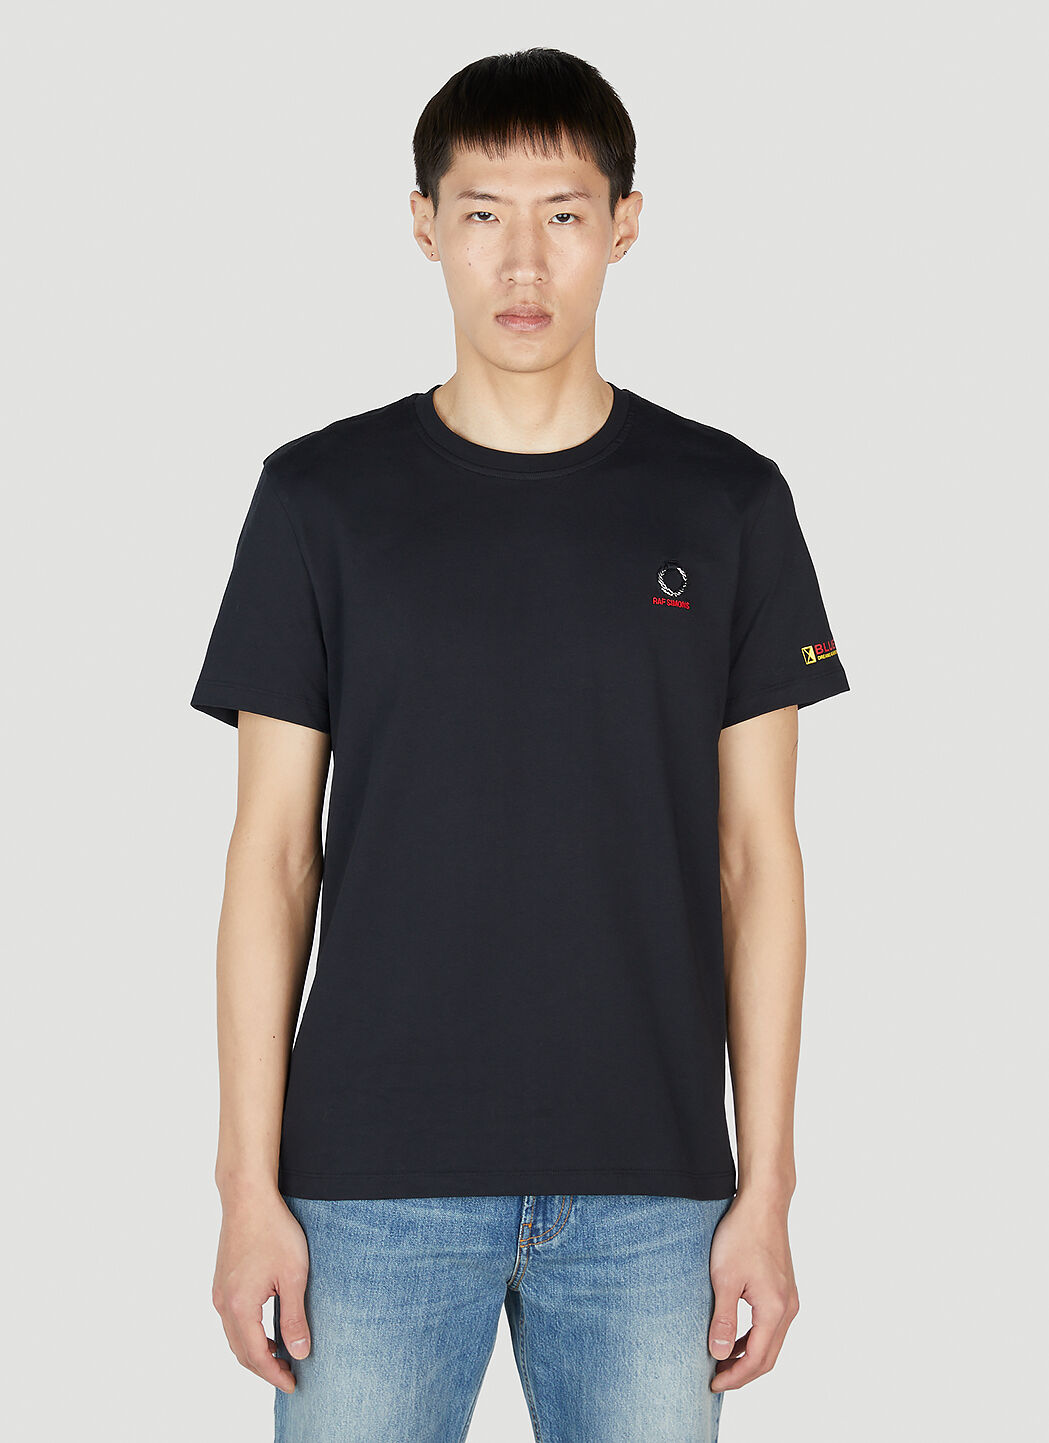 Raf Simons x Fred Perry 印花短袖 T 恤 黑色 rsf0152009